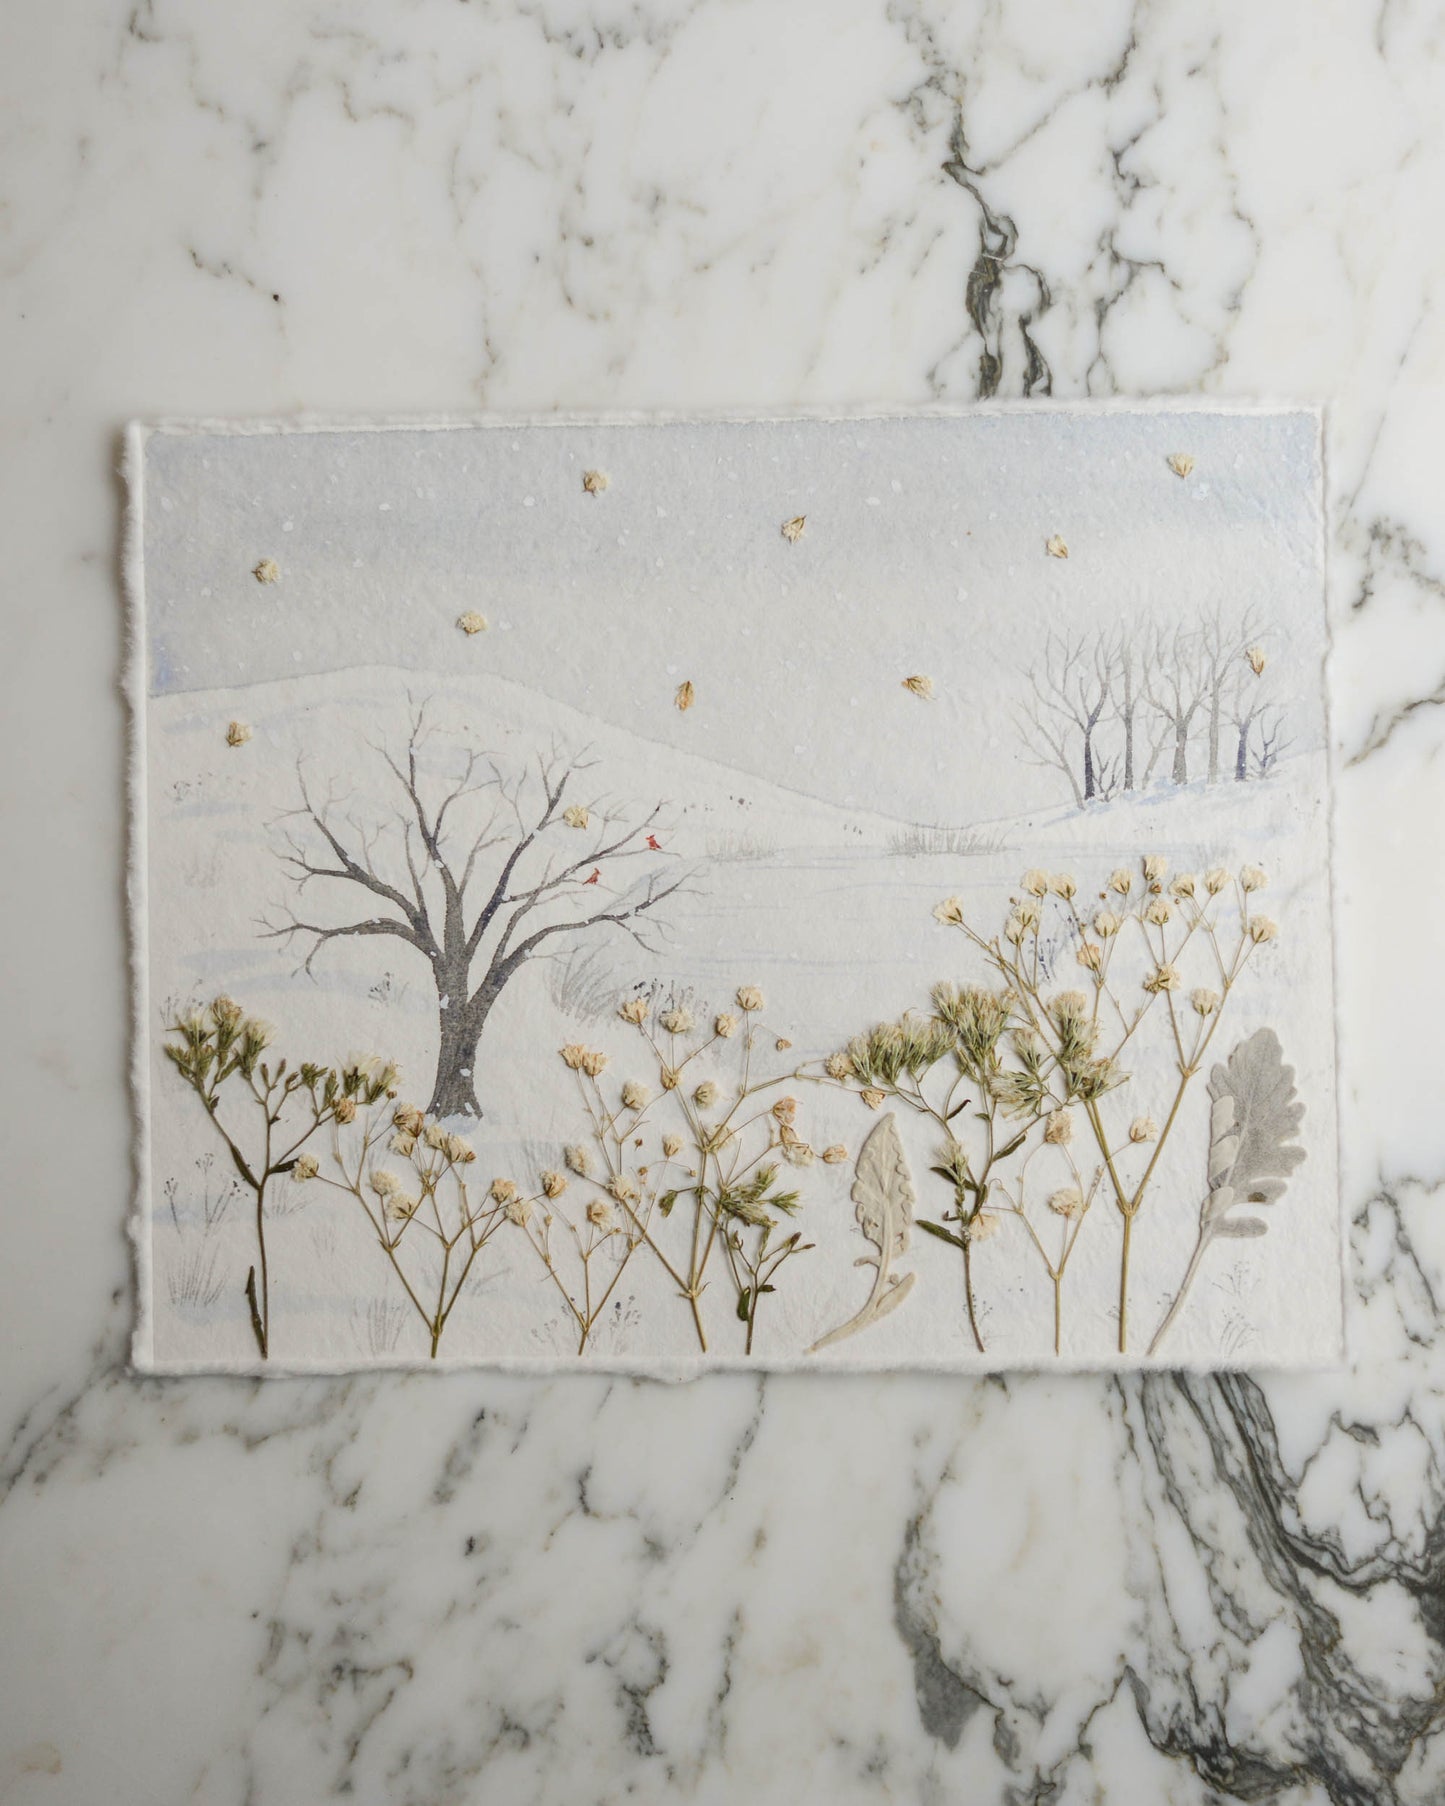 Snow Day - Original Artwork, 8x10" Watercolor and Pressed Flowers